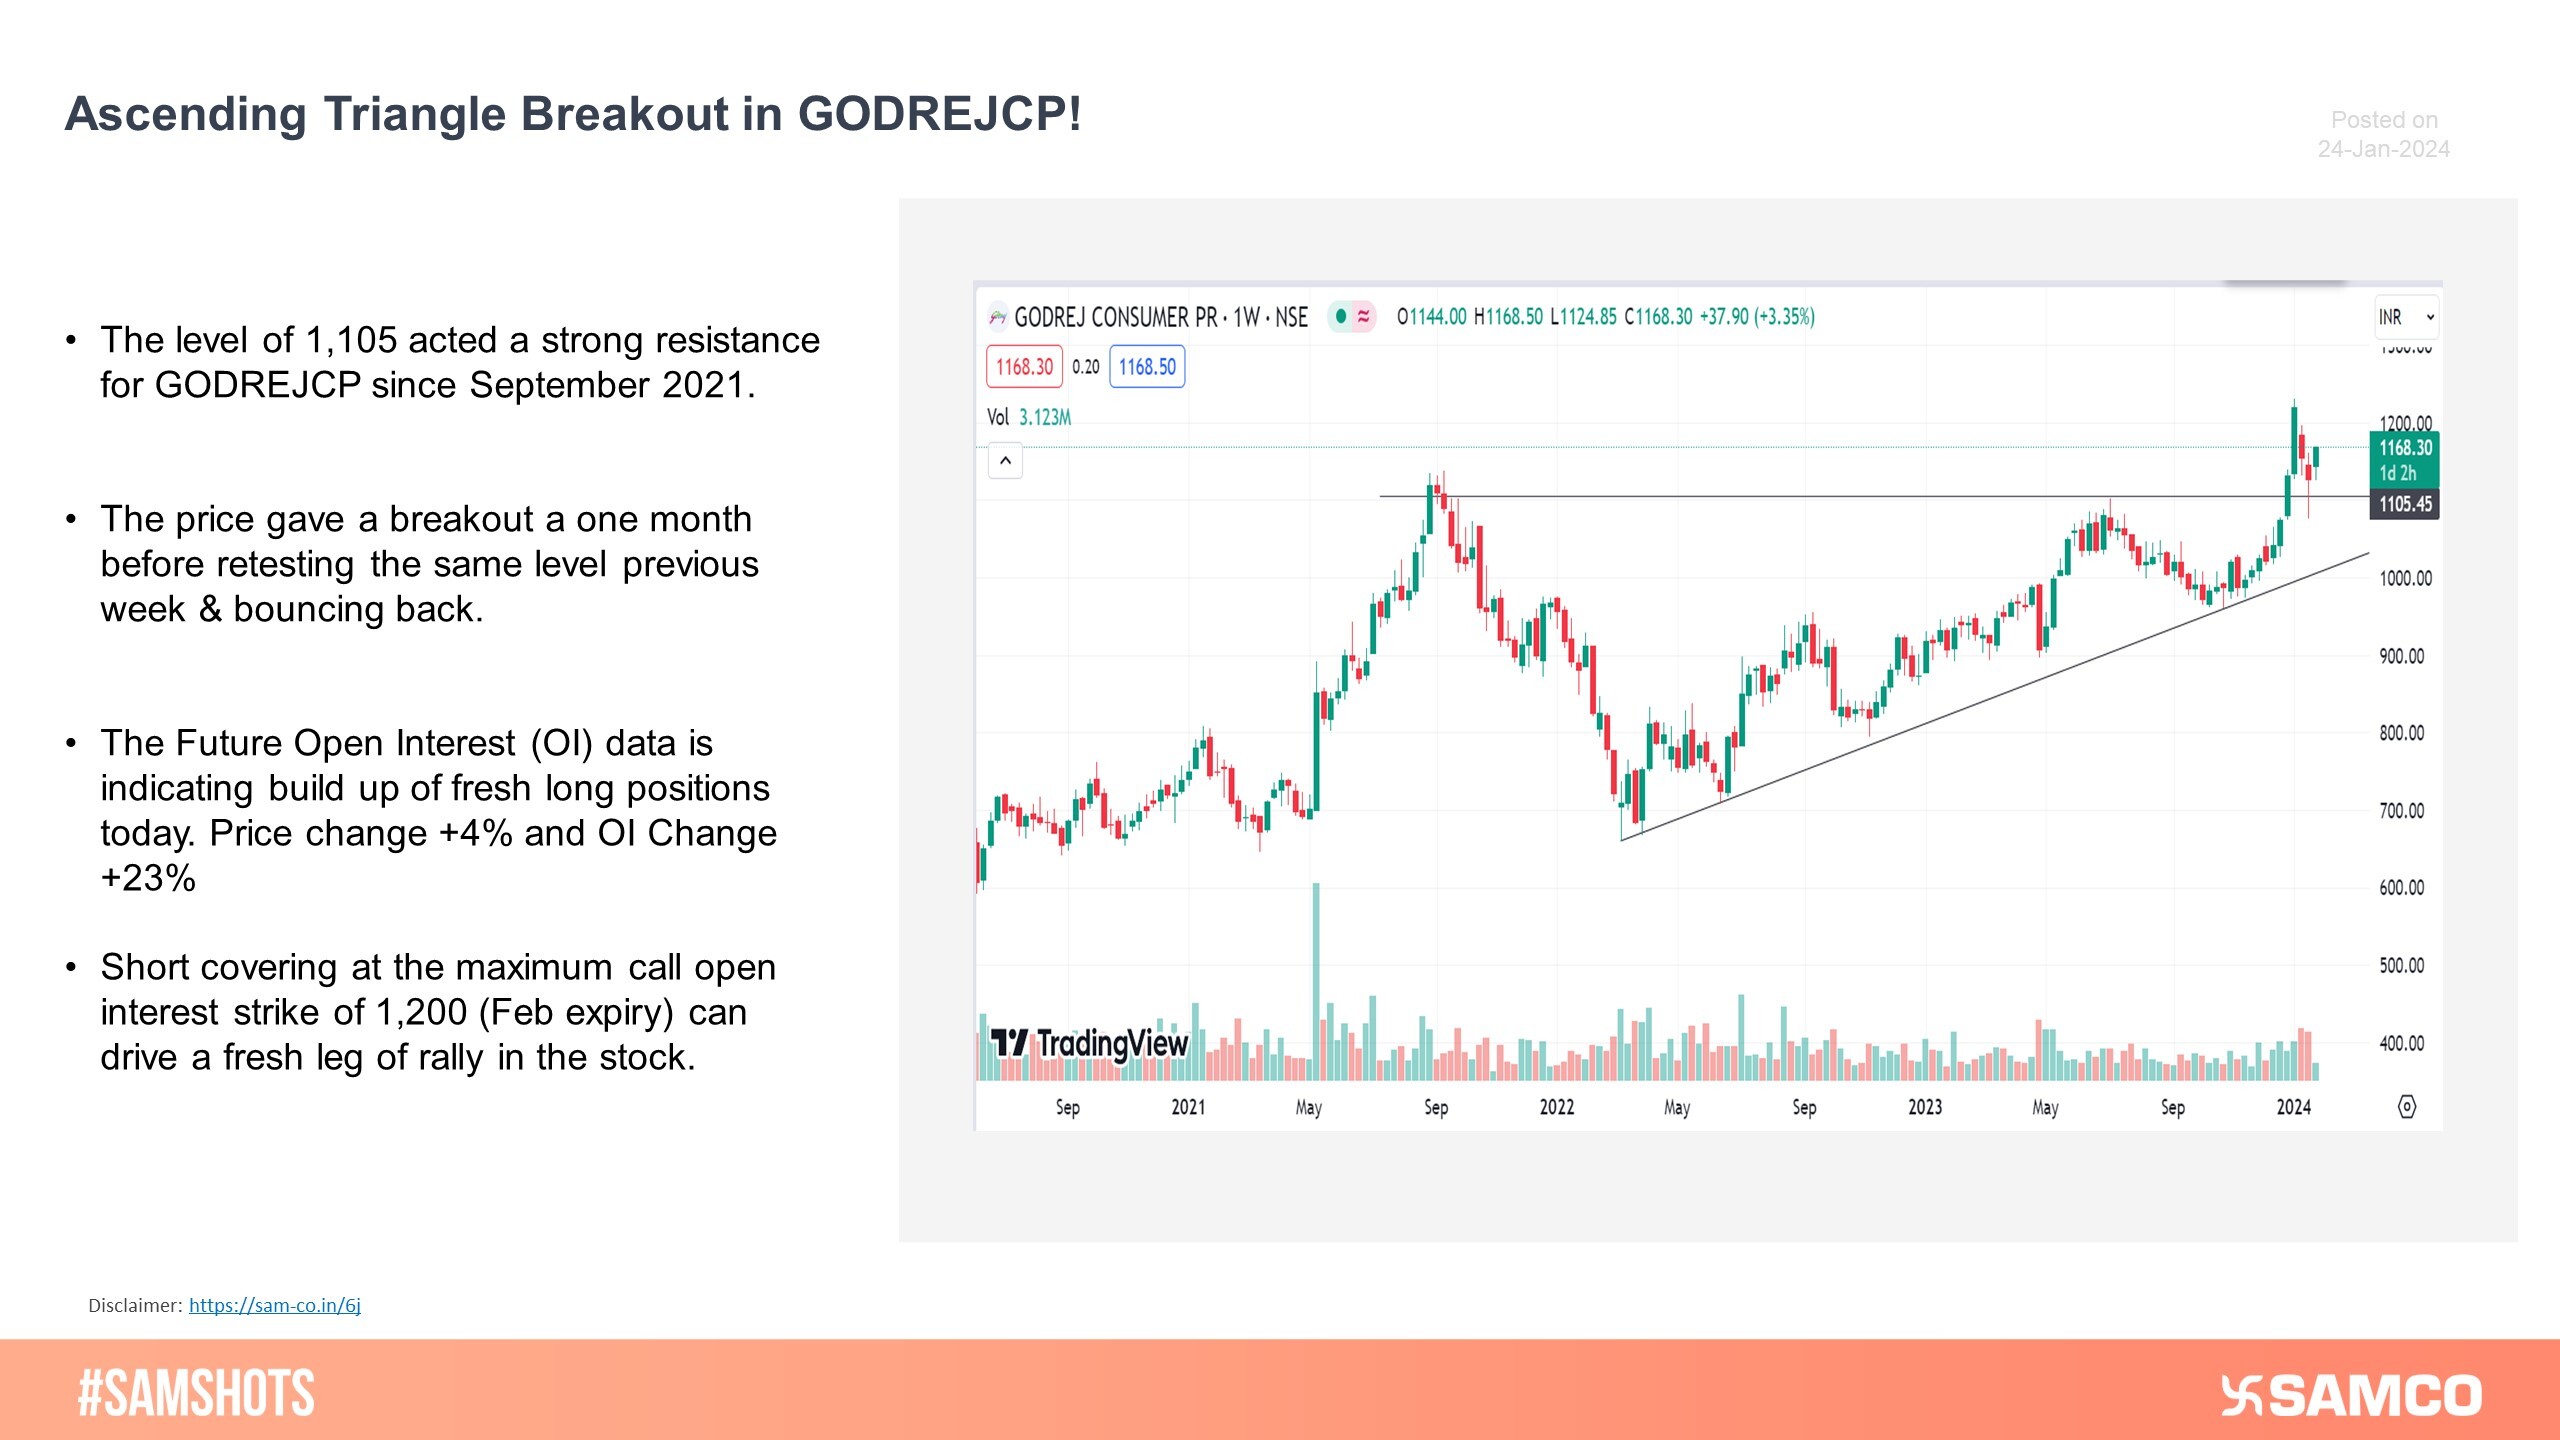 GODREJCP has given an ascending triangle breakout on the weekly chart. Short covering at 1,200 Strike can drive fresh leg of rally in the stock.